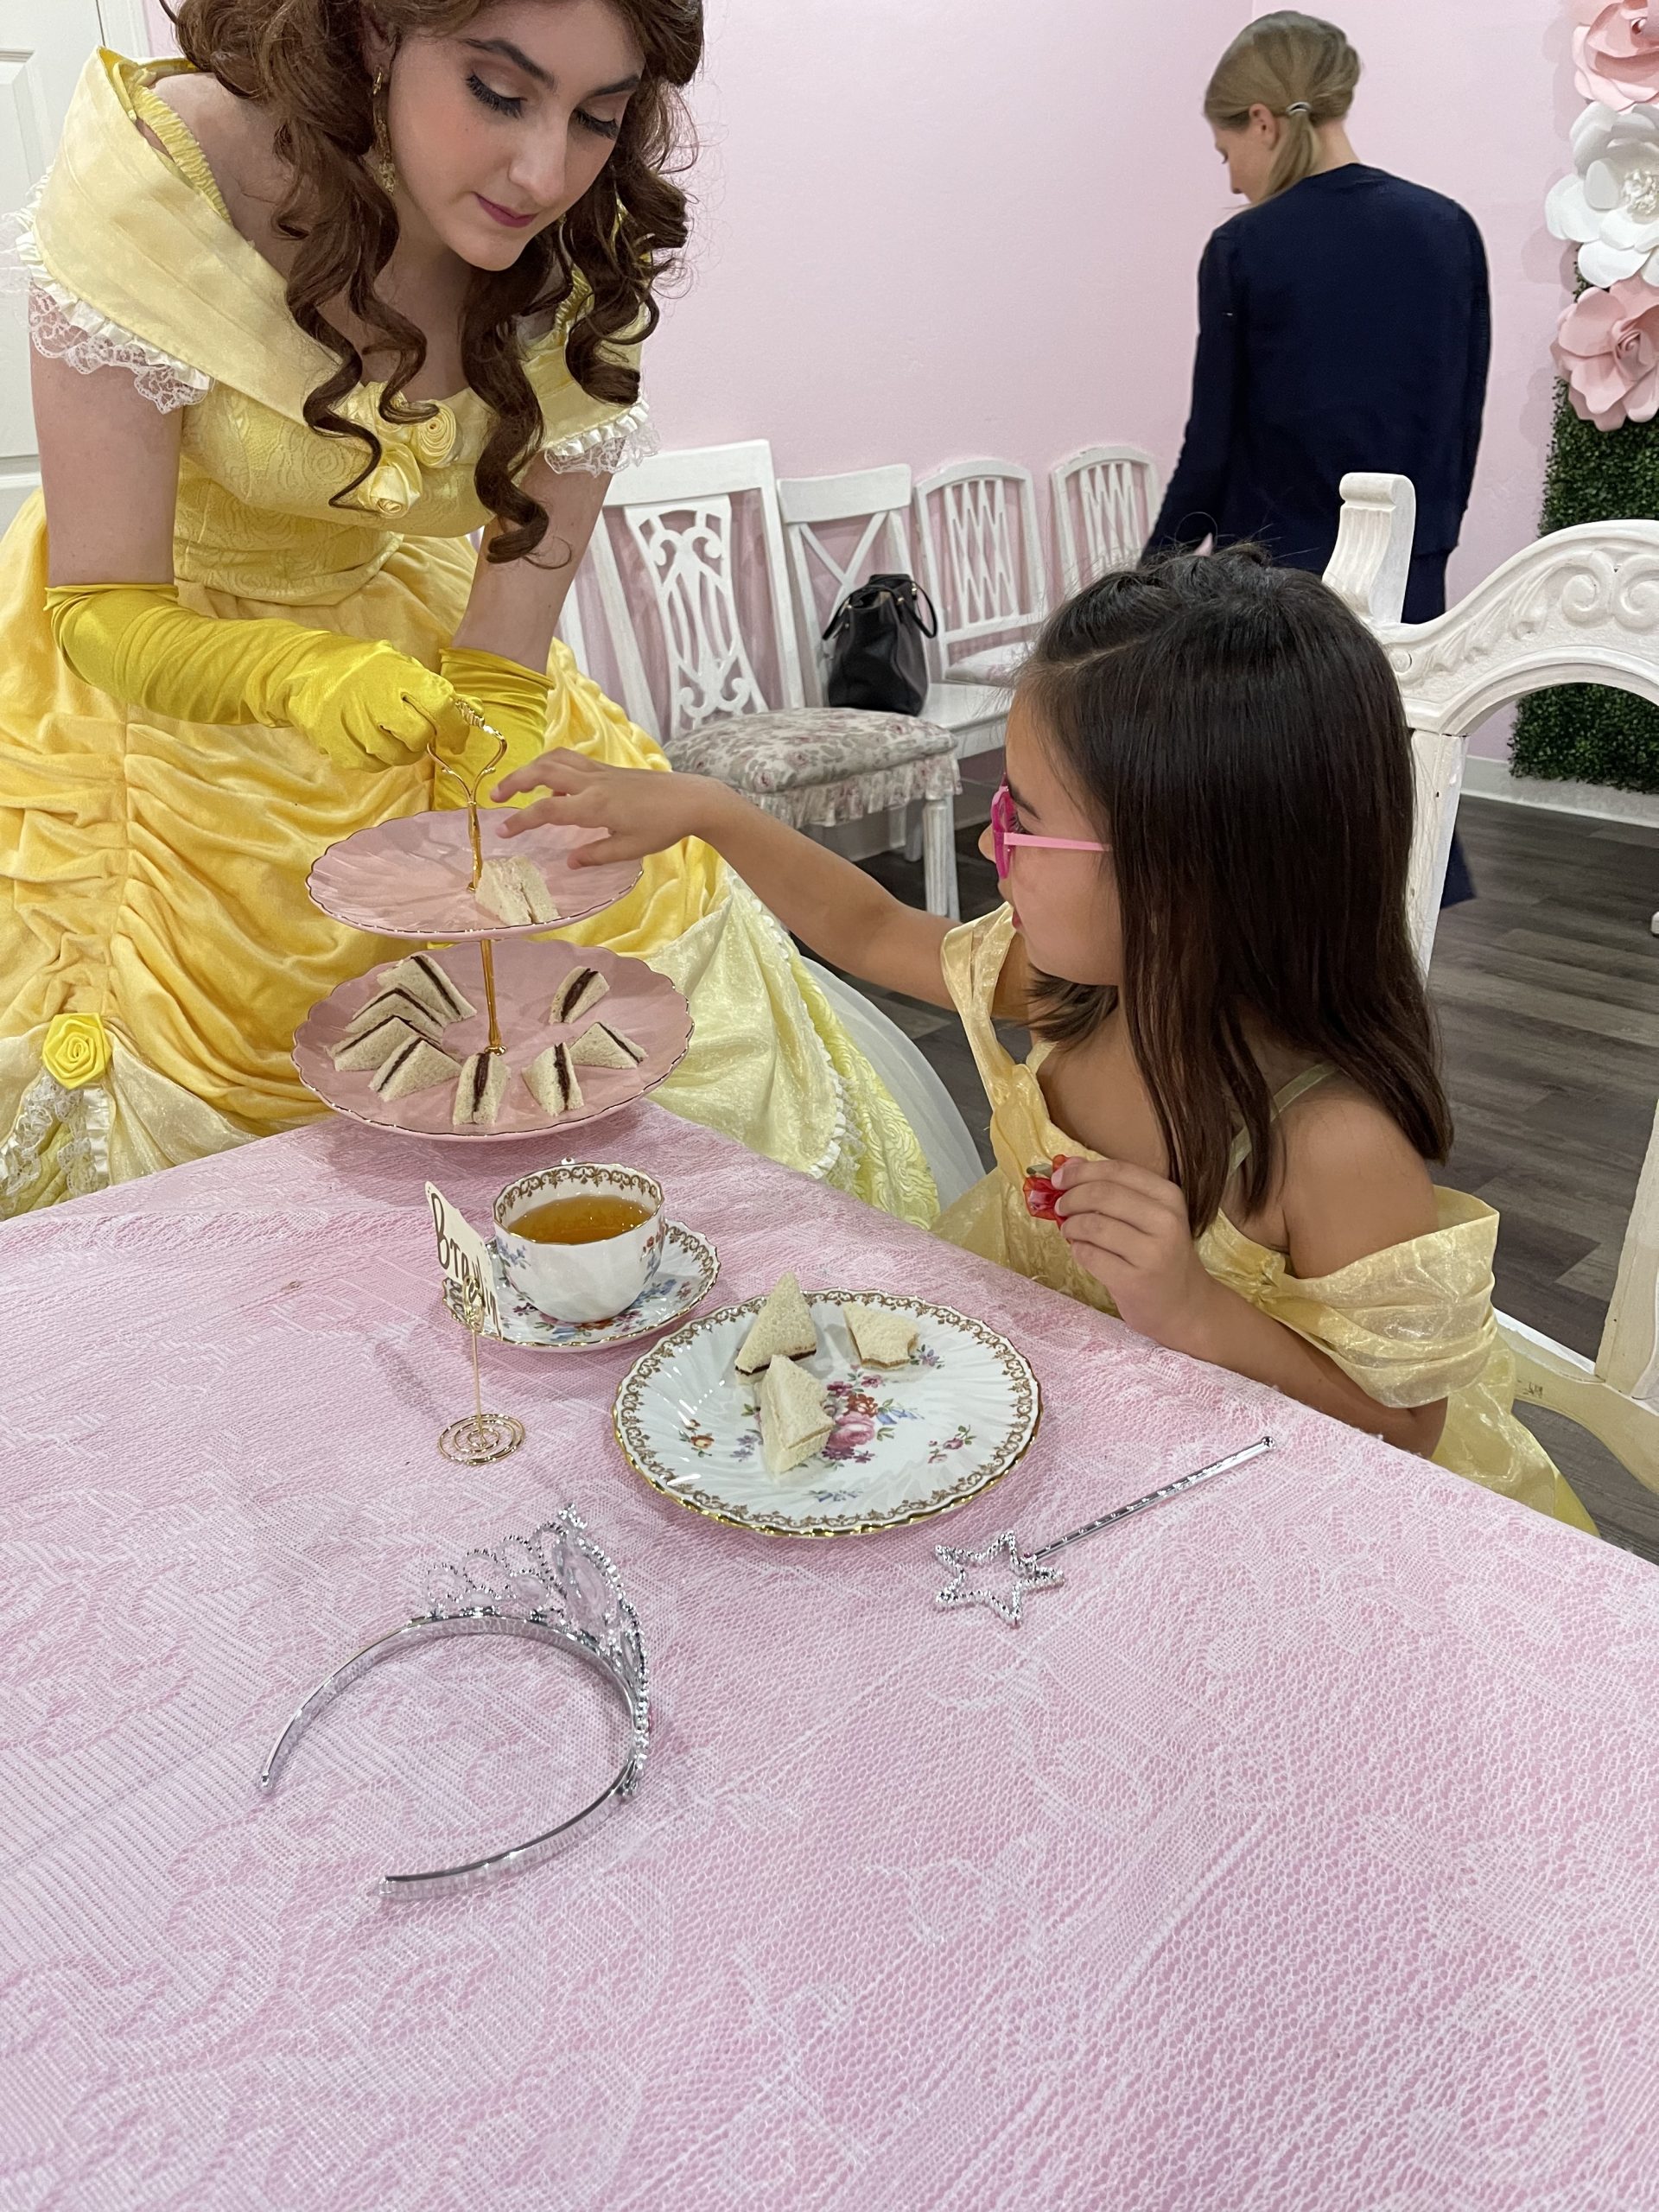 Belle serving tea sandwiches to a little girl dressed as Belle at a birthday party.